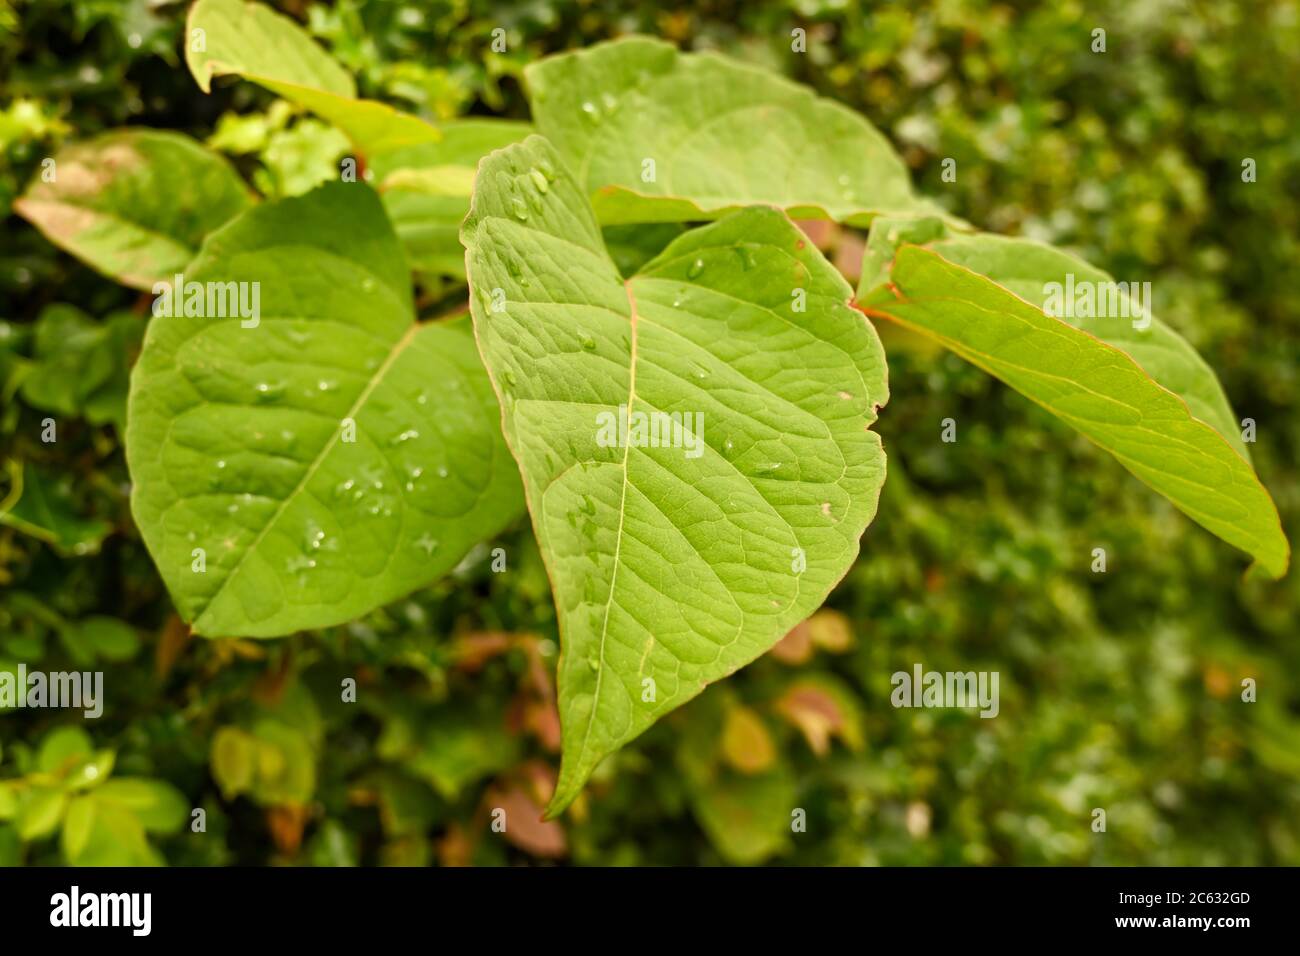 The fast-growing, invasive, plant Japanese Knotweed or 'Polygonum cuspidatum' or Fallopia japonica' Stock Photo